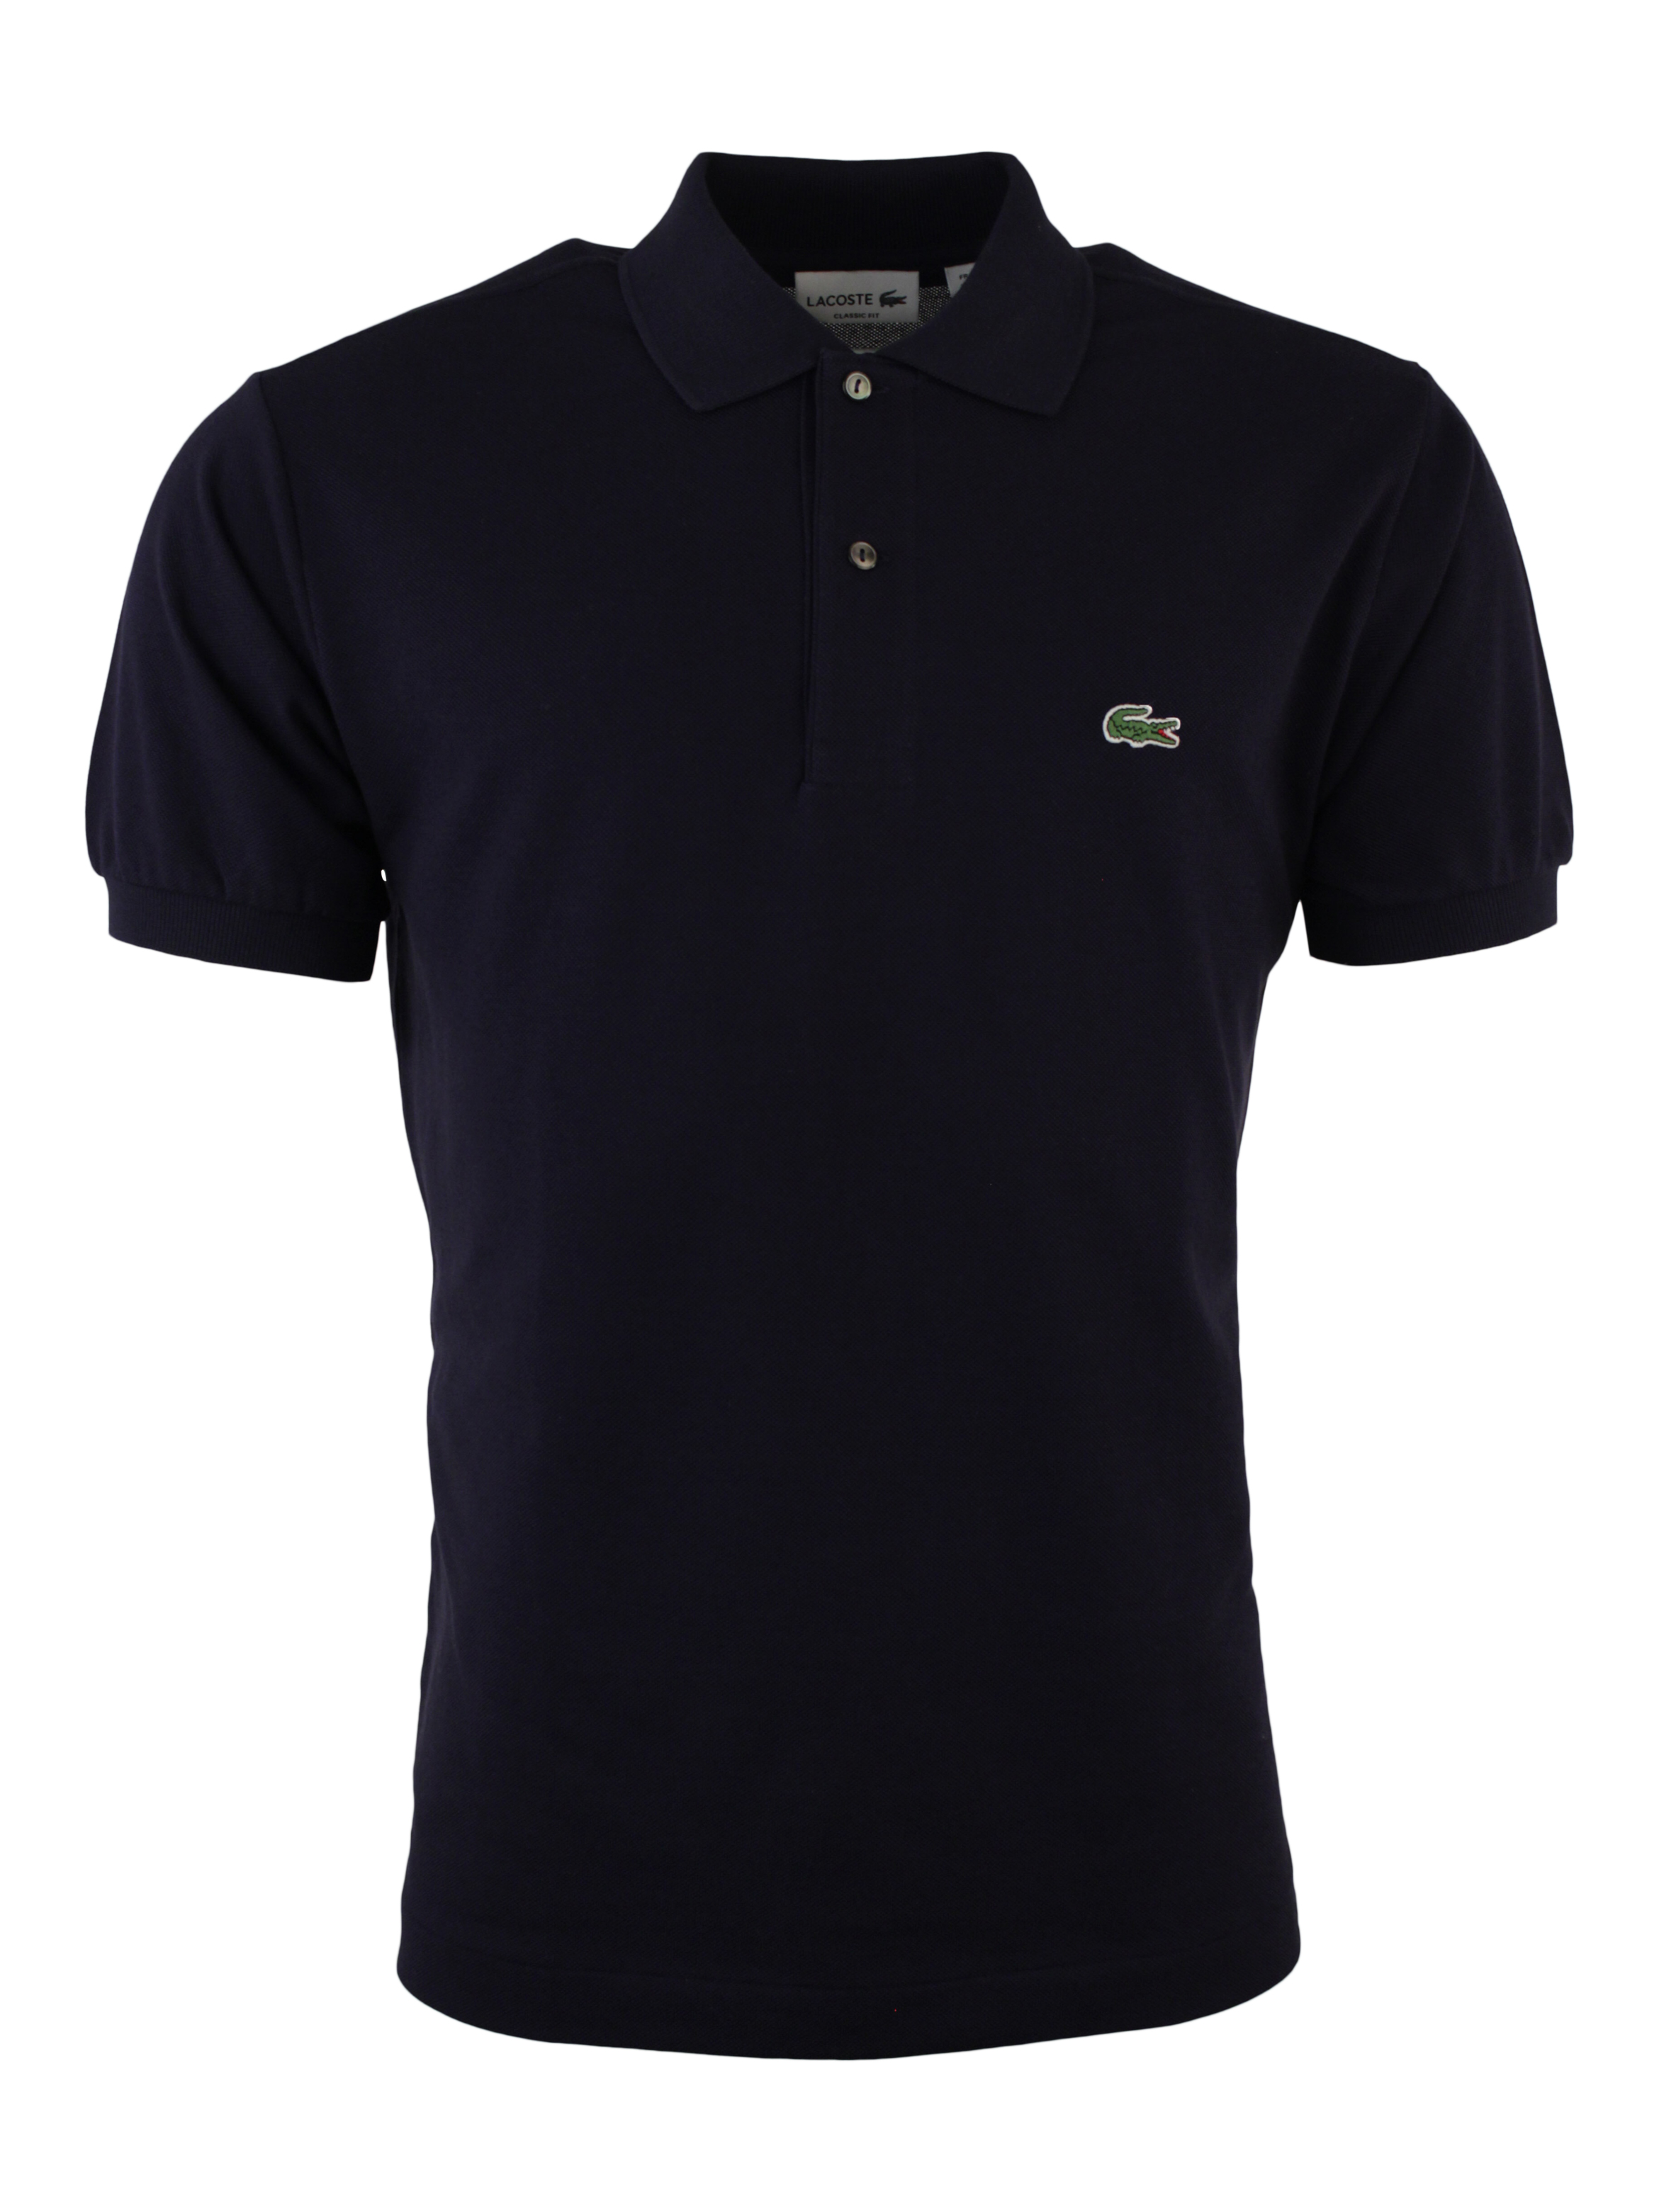 Køb Lacoste 'Ribbed Collar' - Navy